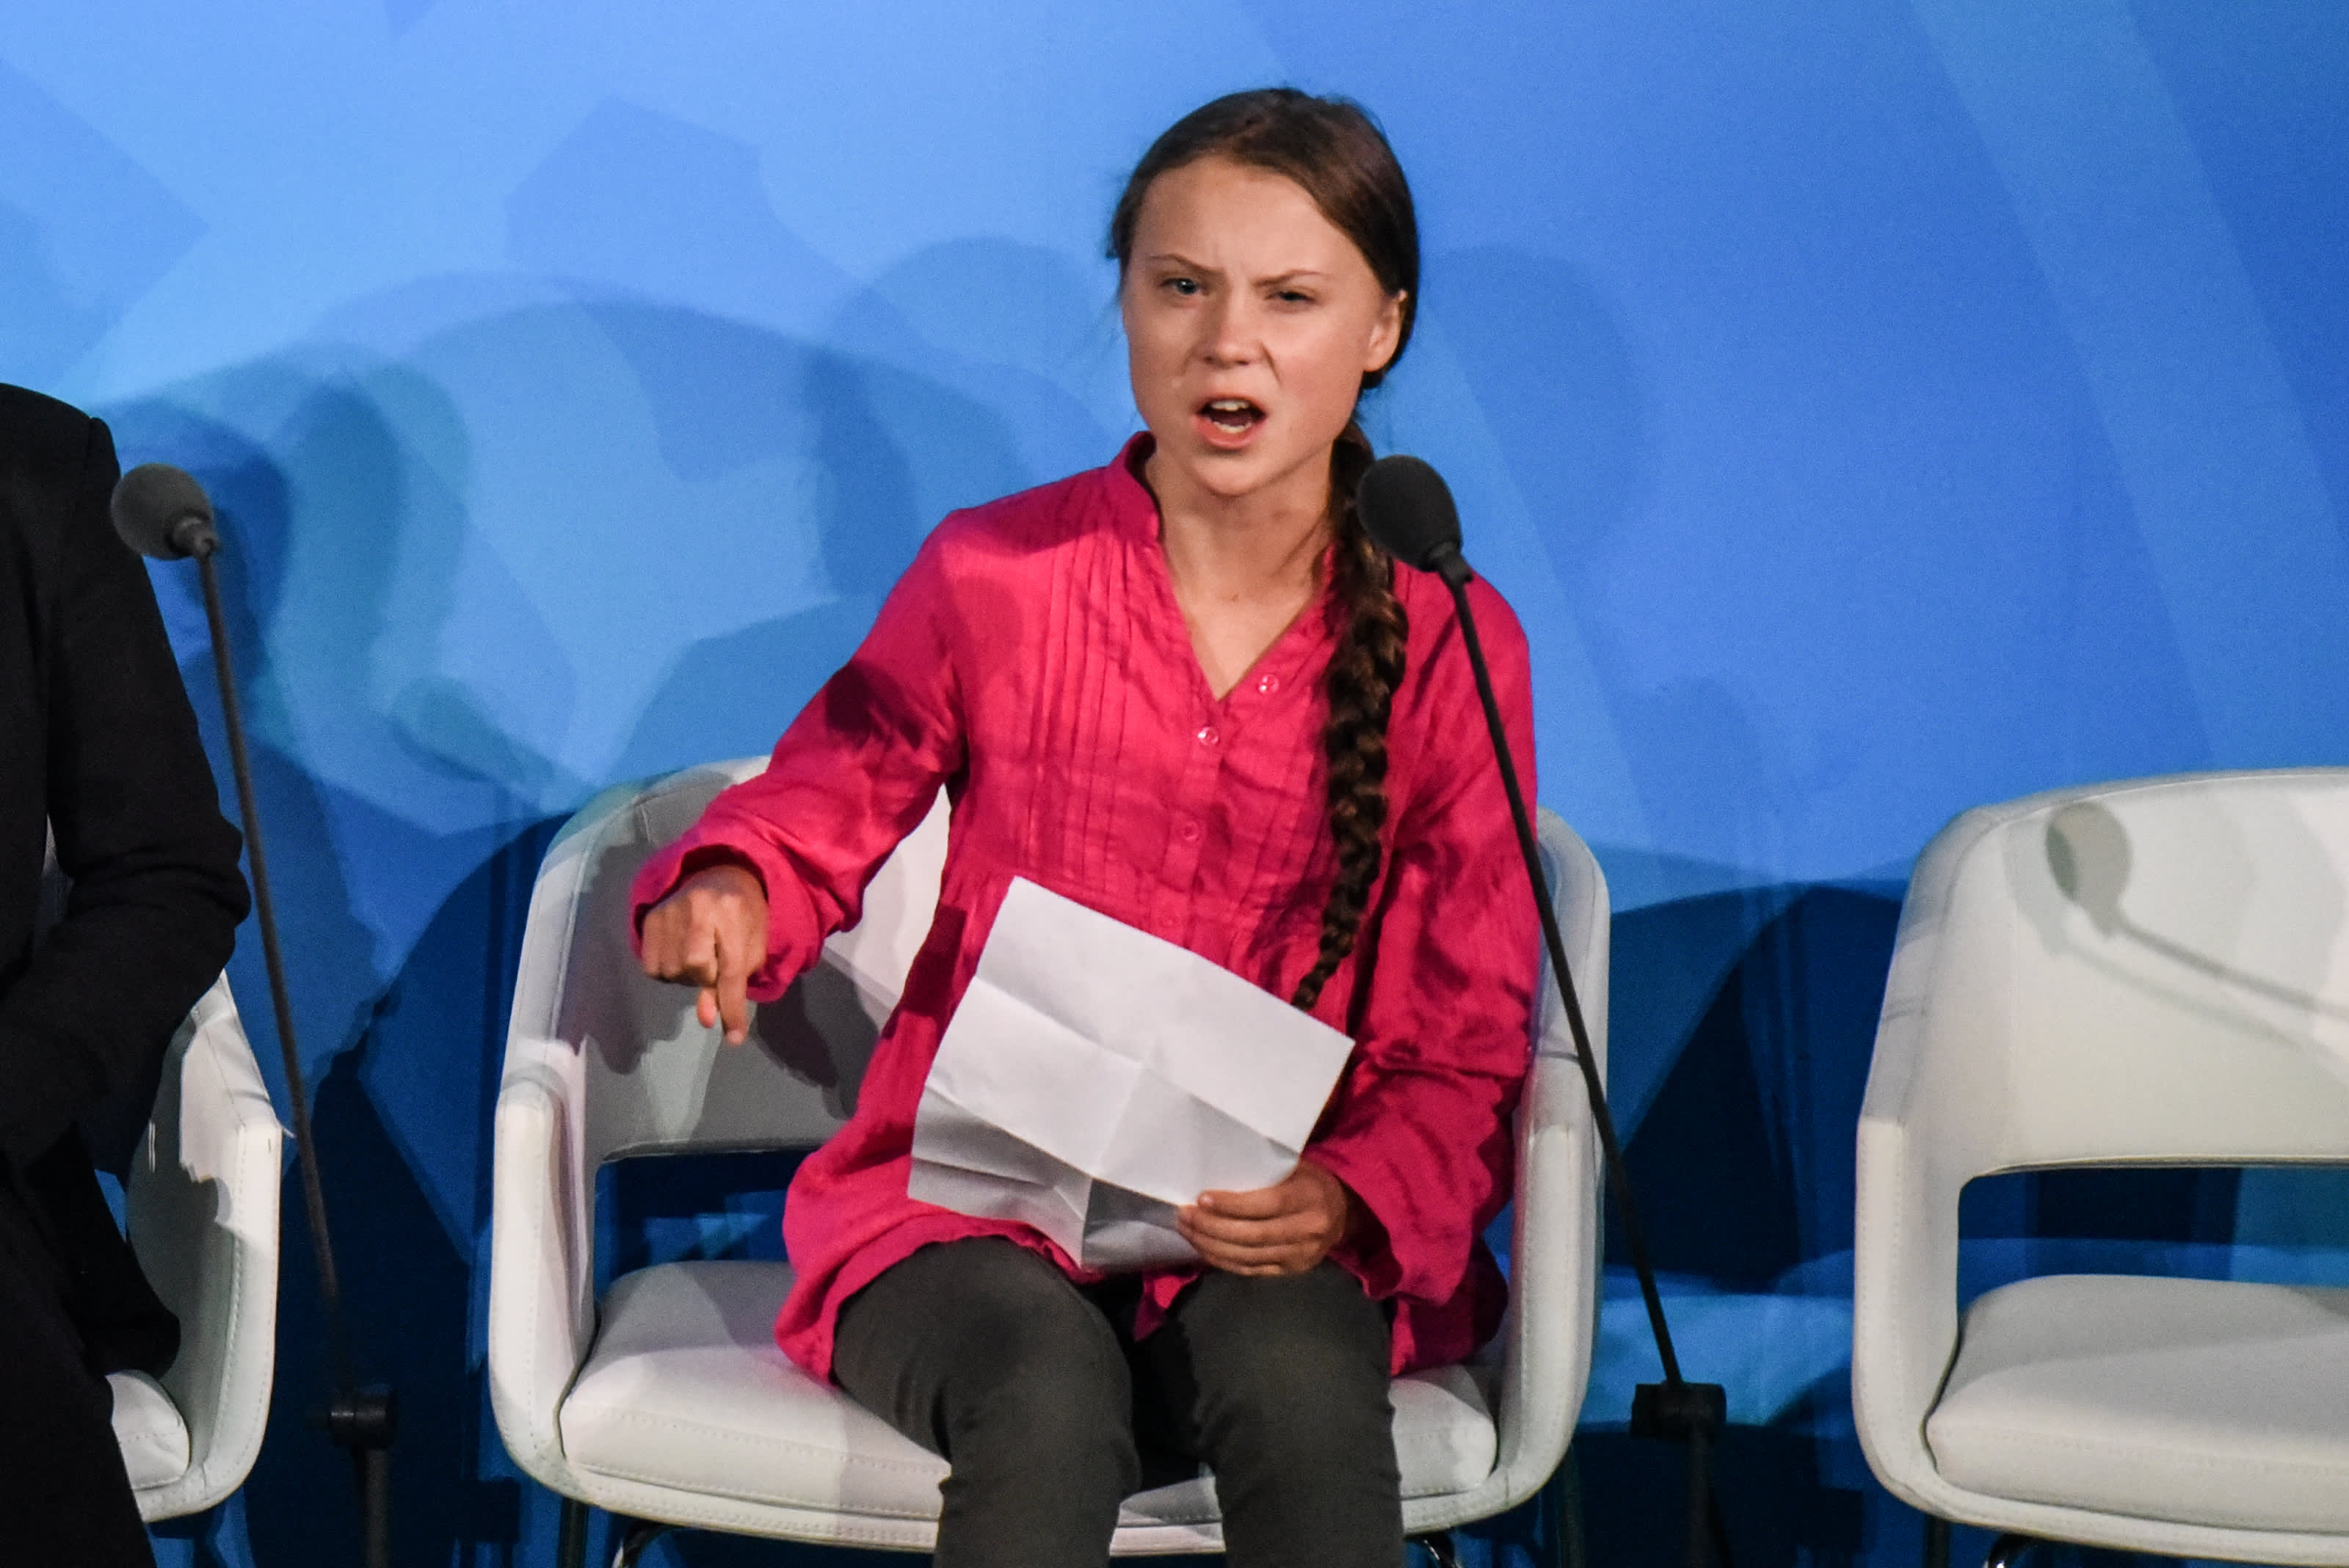 How Greta Thunberg's rise could backfire on environmentalists